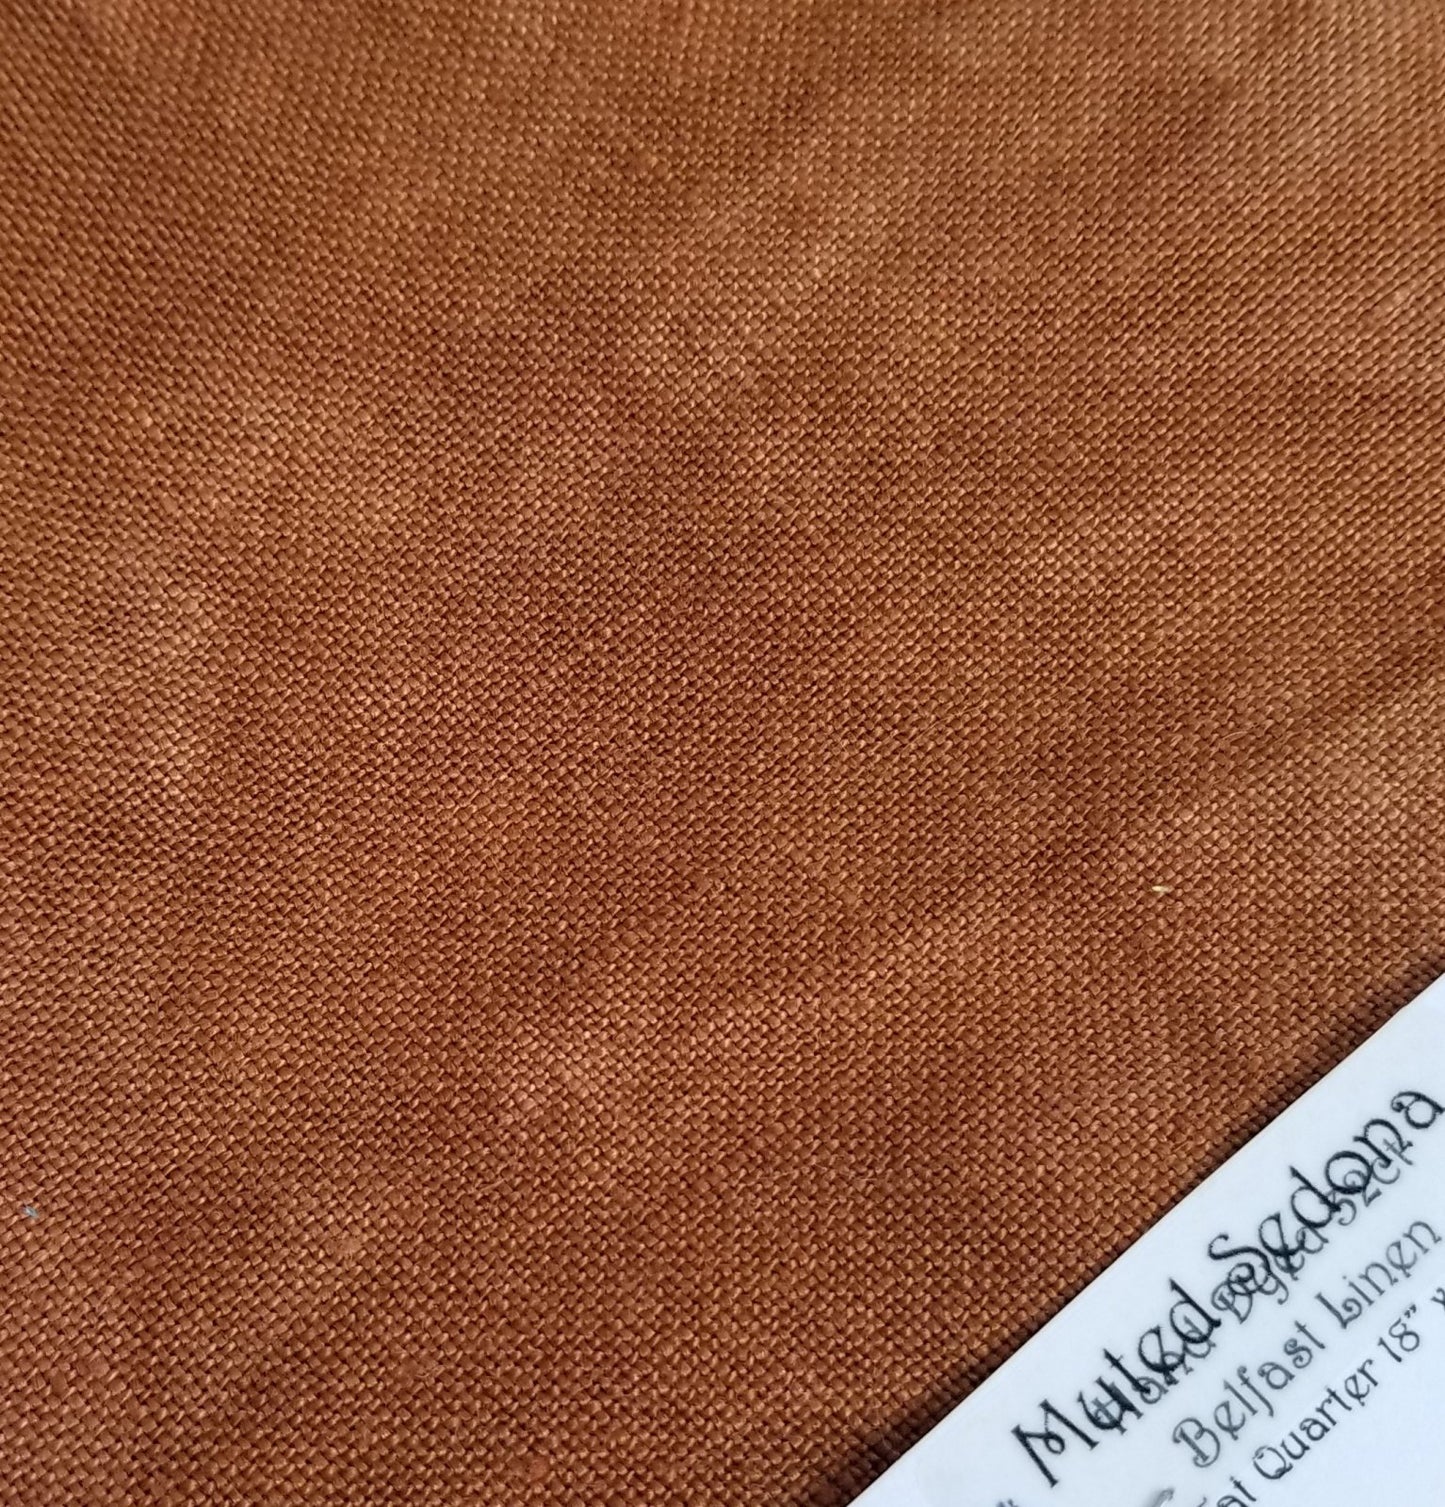 Muted Sedona 28 Count Linen Fat Quarter from Fiber on a Whim